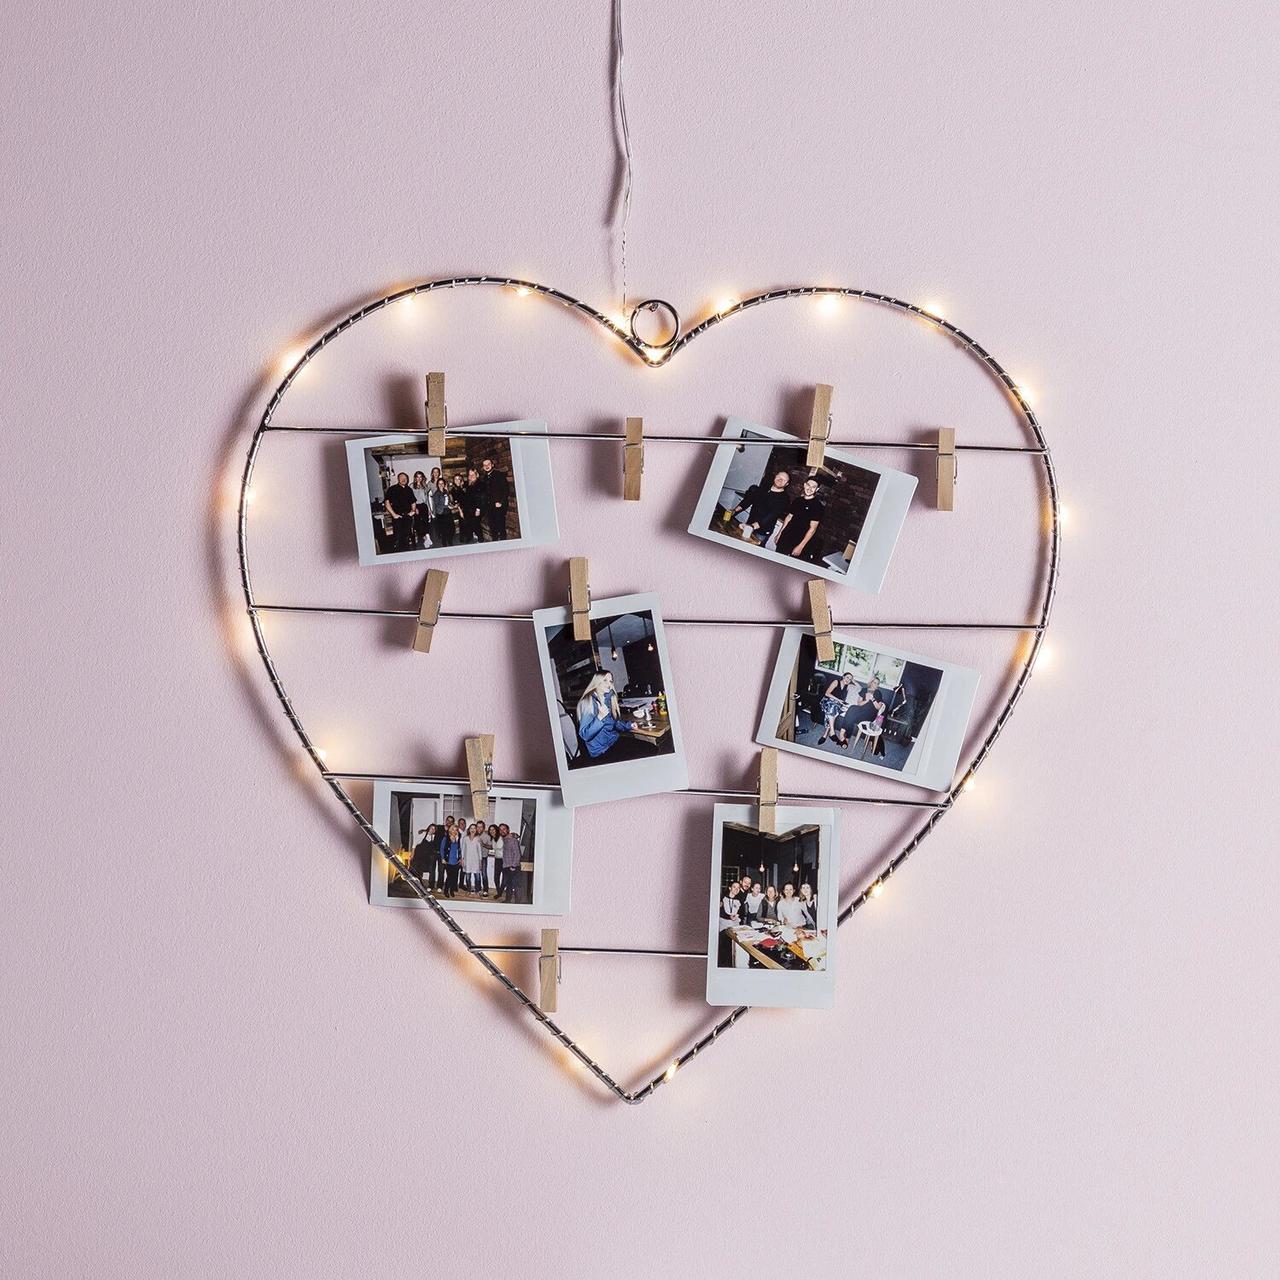 Light up wire heart with photos pegged on 